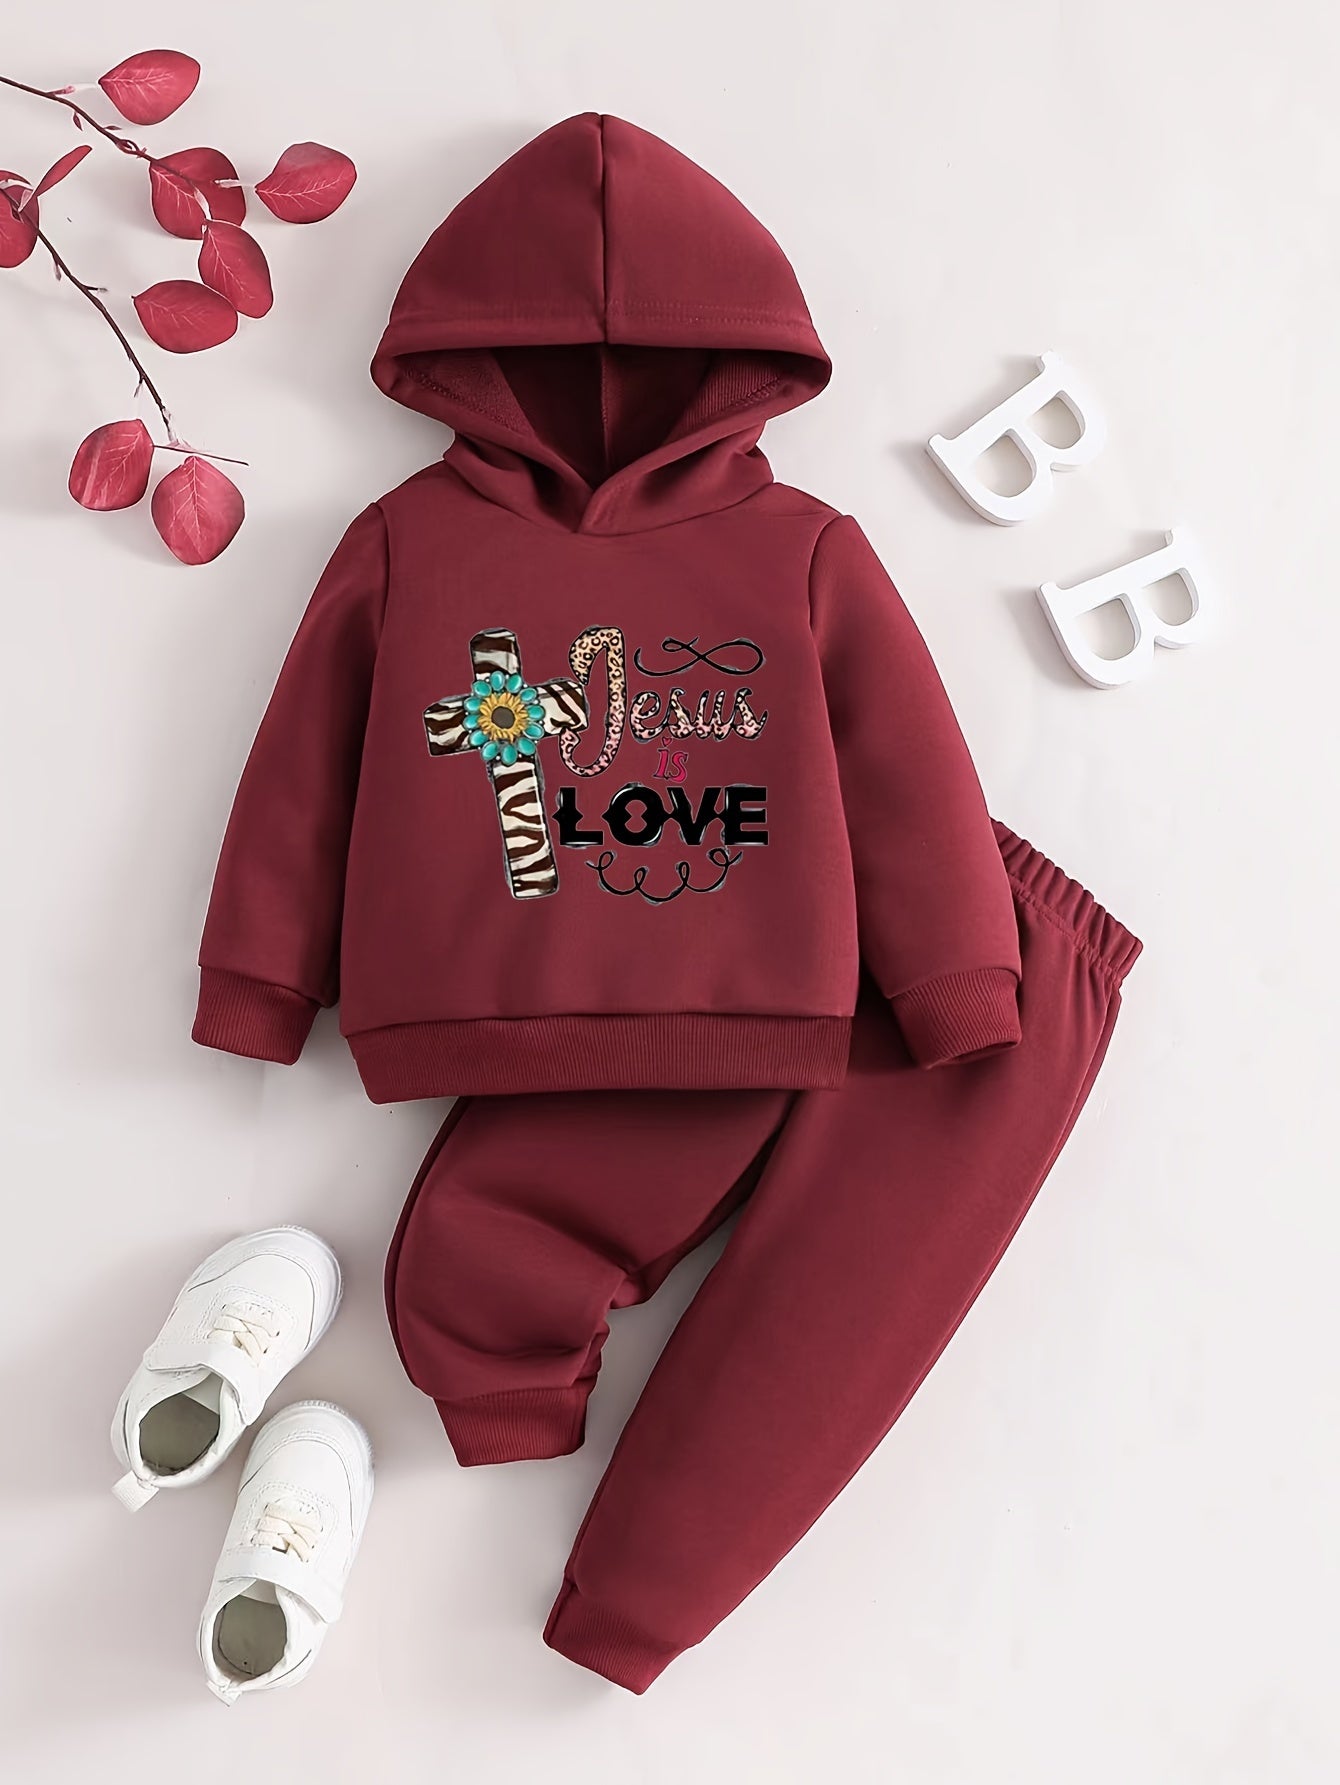 Jesus Is Love Youth Christian Casual Outfit claimedbygoddesigns